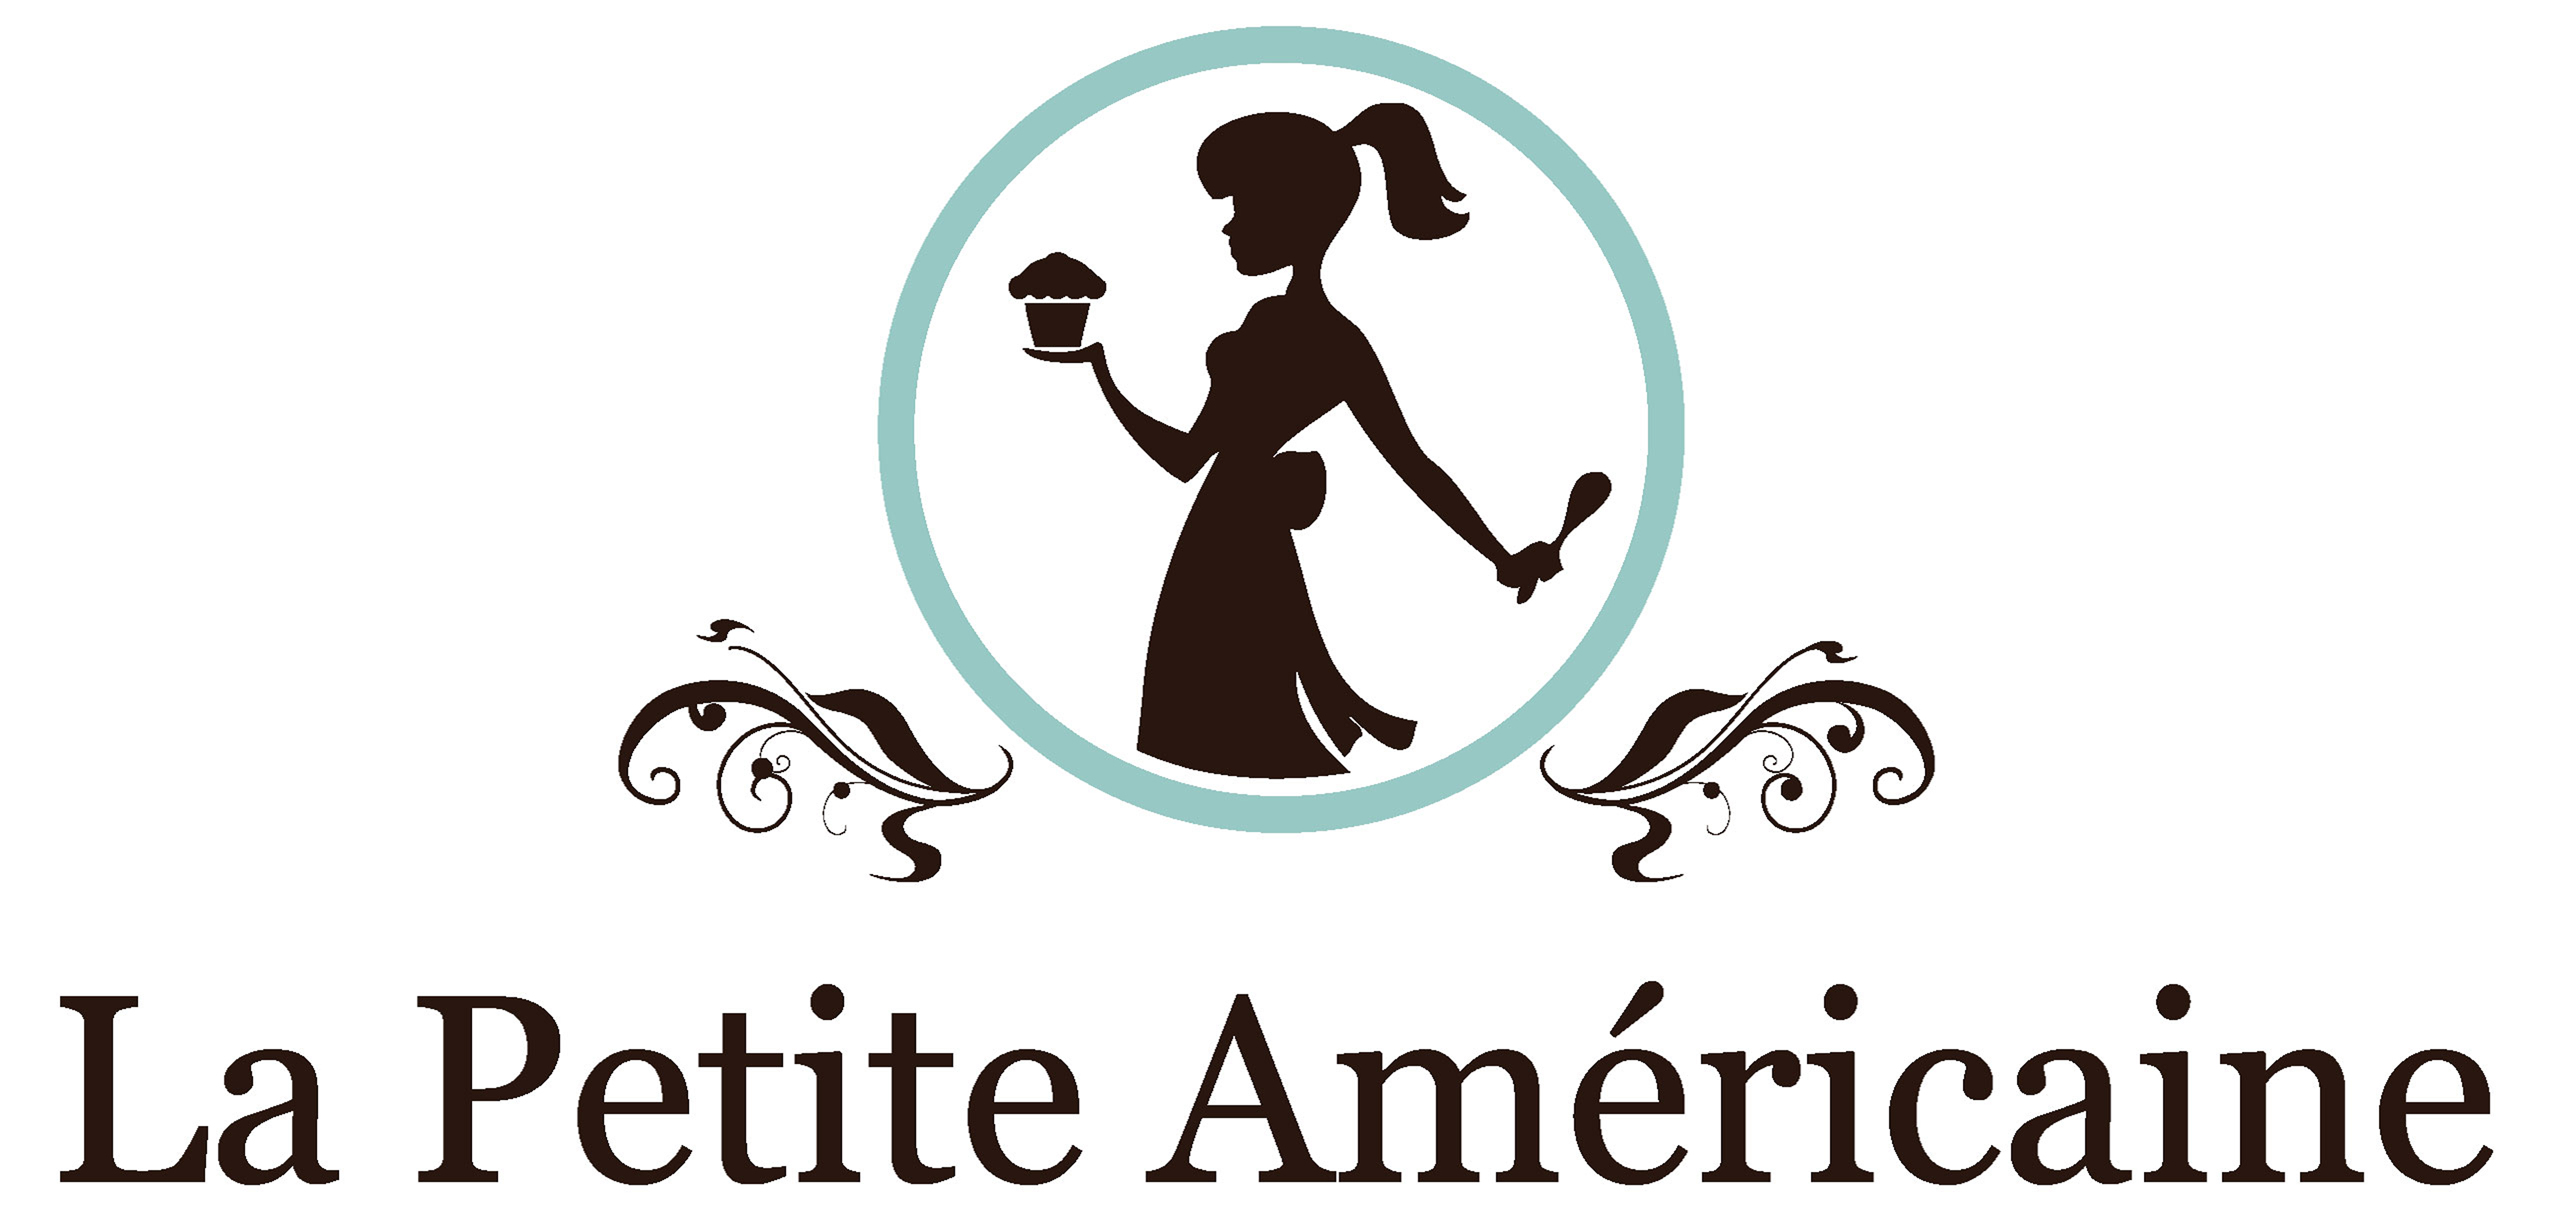 {Eat!} Cakes from another era by La Petite Américaine